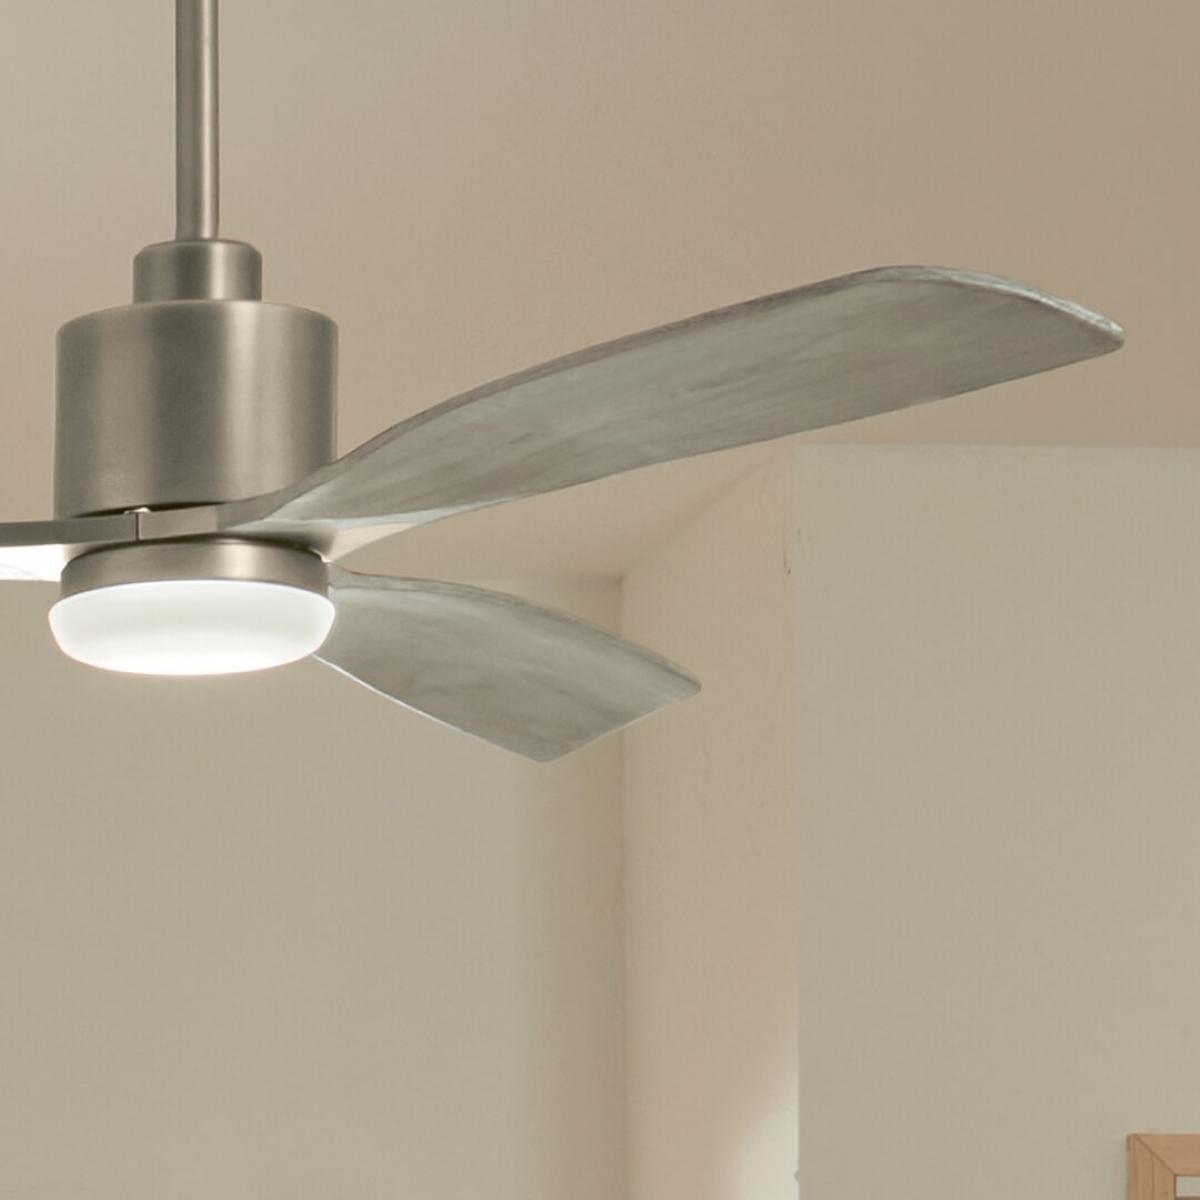 Ridley Ii 60 Inch Propeller Ceiling Fan With Light, Wall Control Included